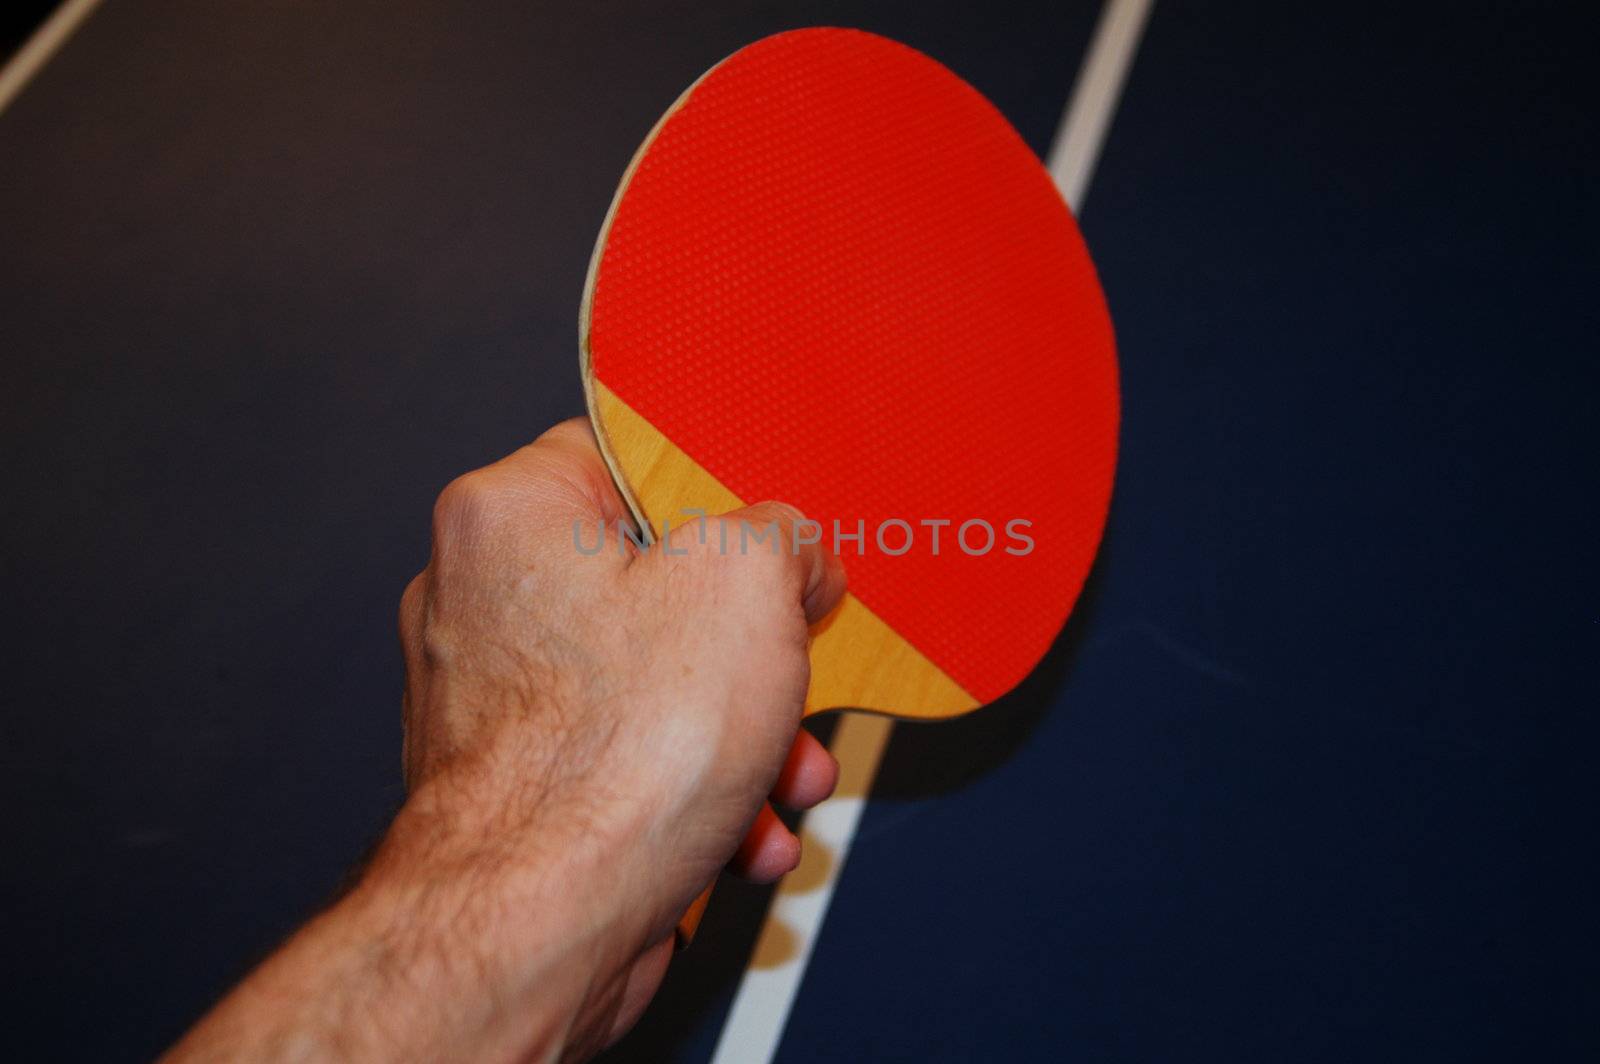 Ping pong game, a hand ready to strike the ball